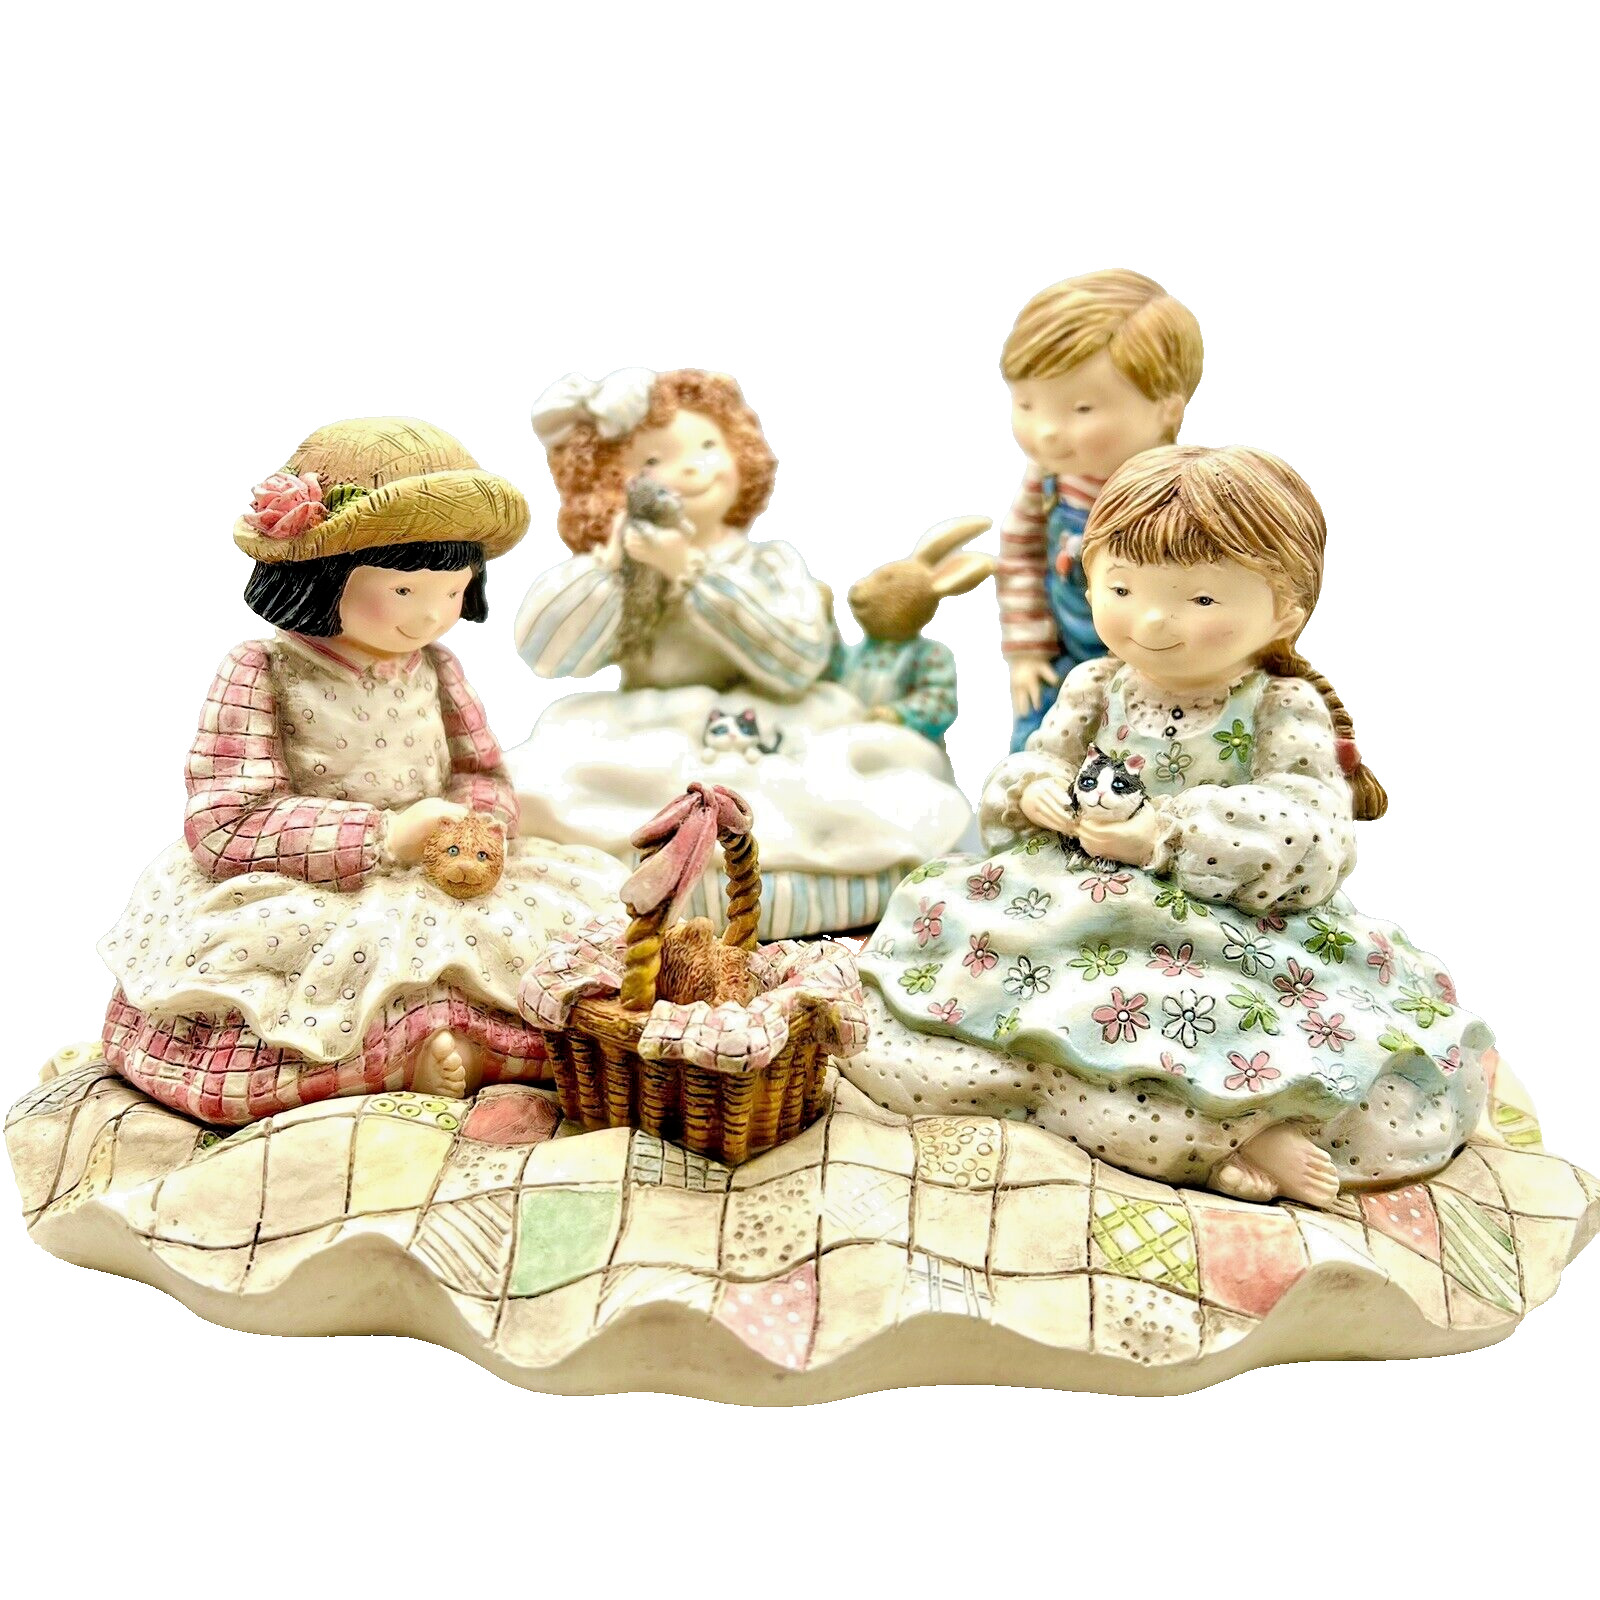 Special Friends Figurine Picnic with Molly 1st Edition Lang&Wise Sherri Baldwin